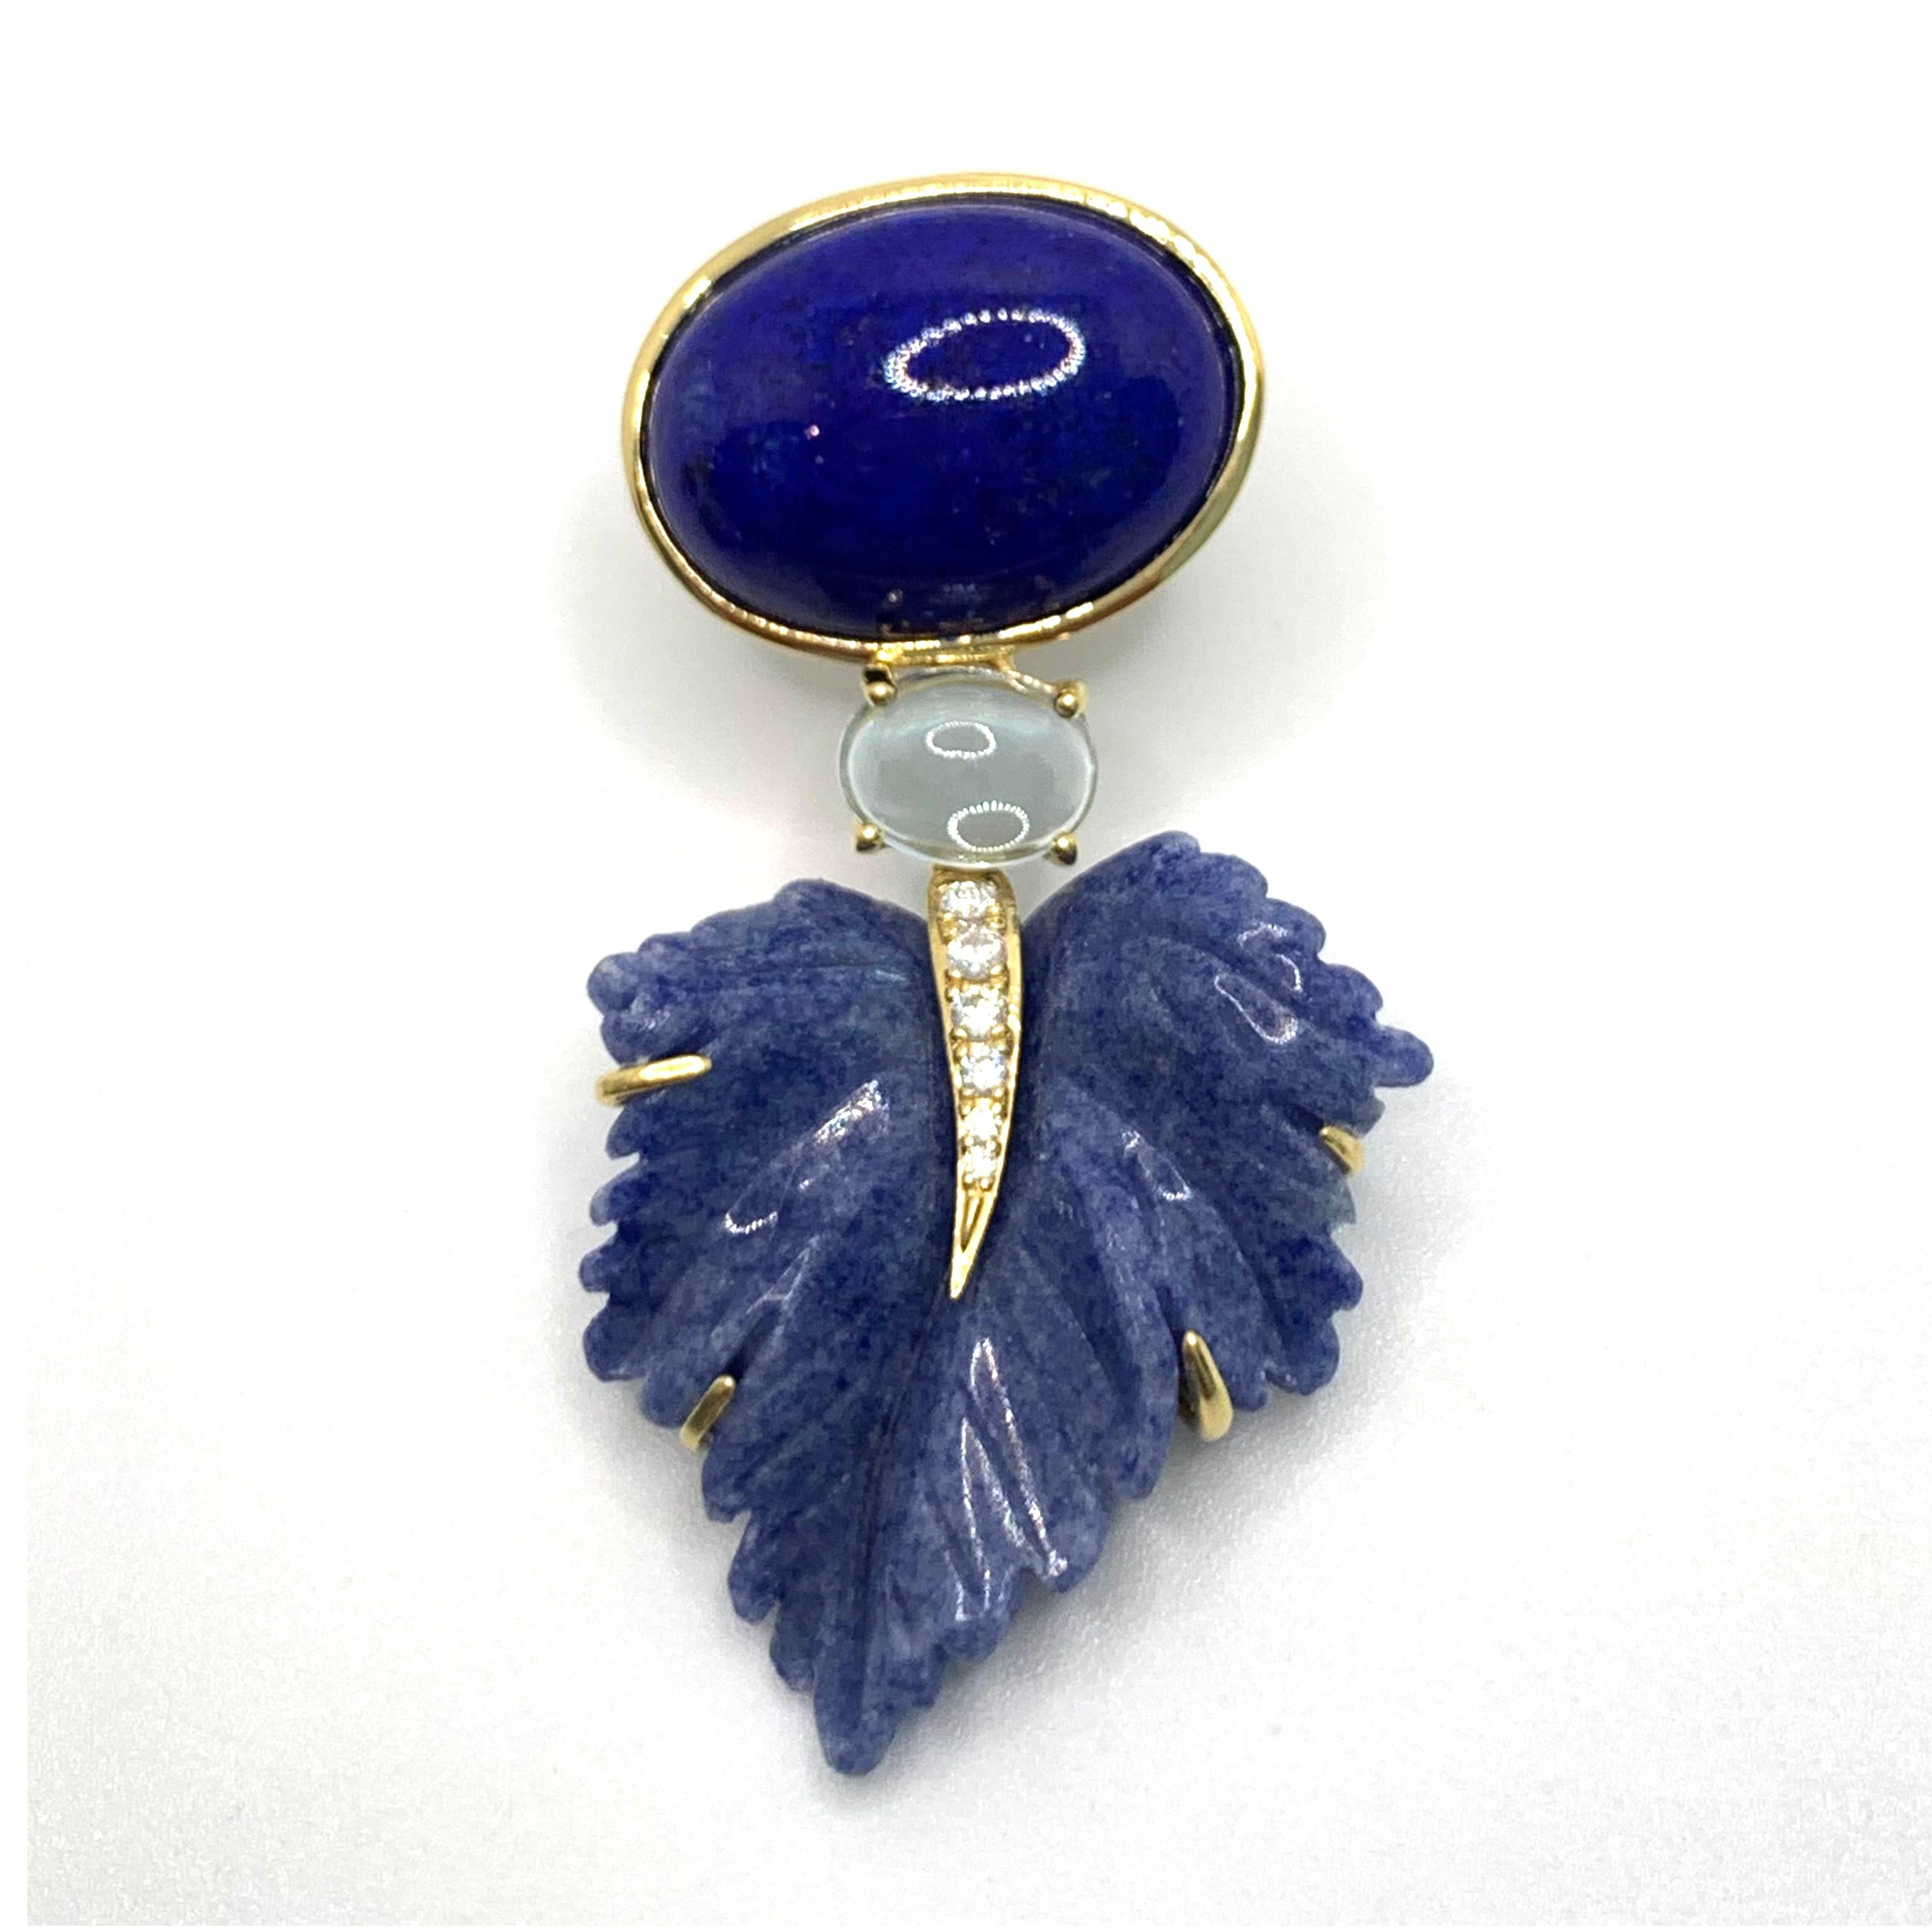 Stunning Cabochon Lapis Lazuli and Carved Dumortierite Leaf Drop Earrings

This gorgeous pair of earrings features oval cabochon-cut lapis lazuli and beautifully 3D carved blue dumortierite leaf with cabochon-cut sky blue topaz in middle, handset in